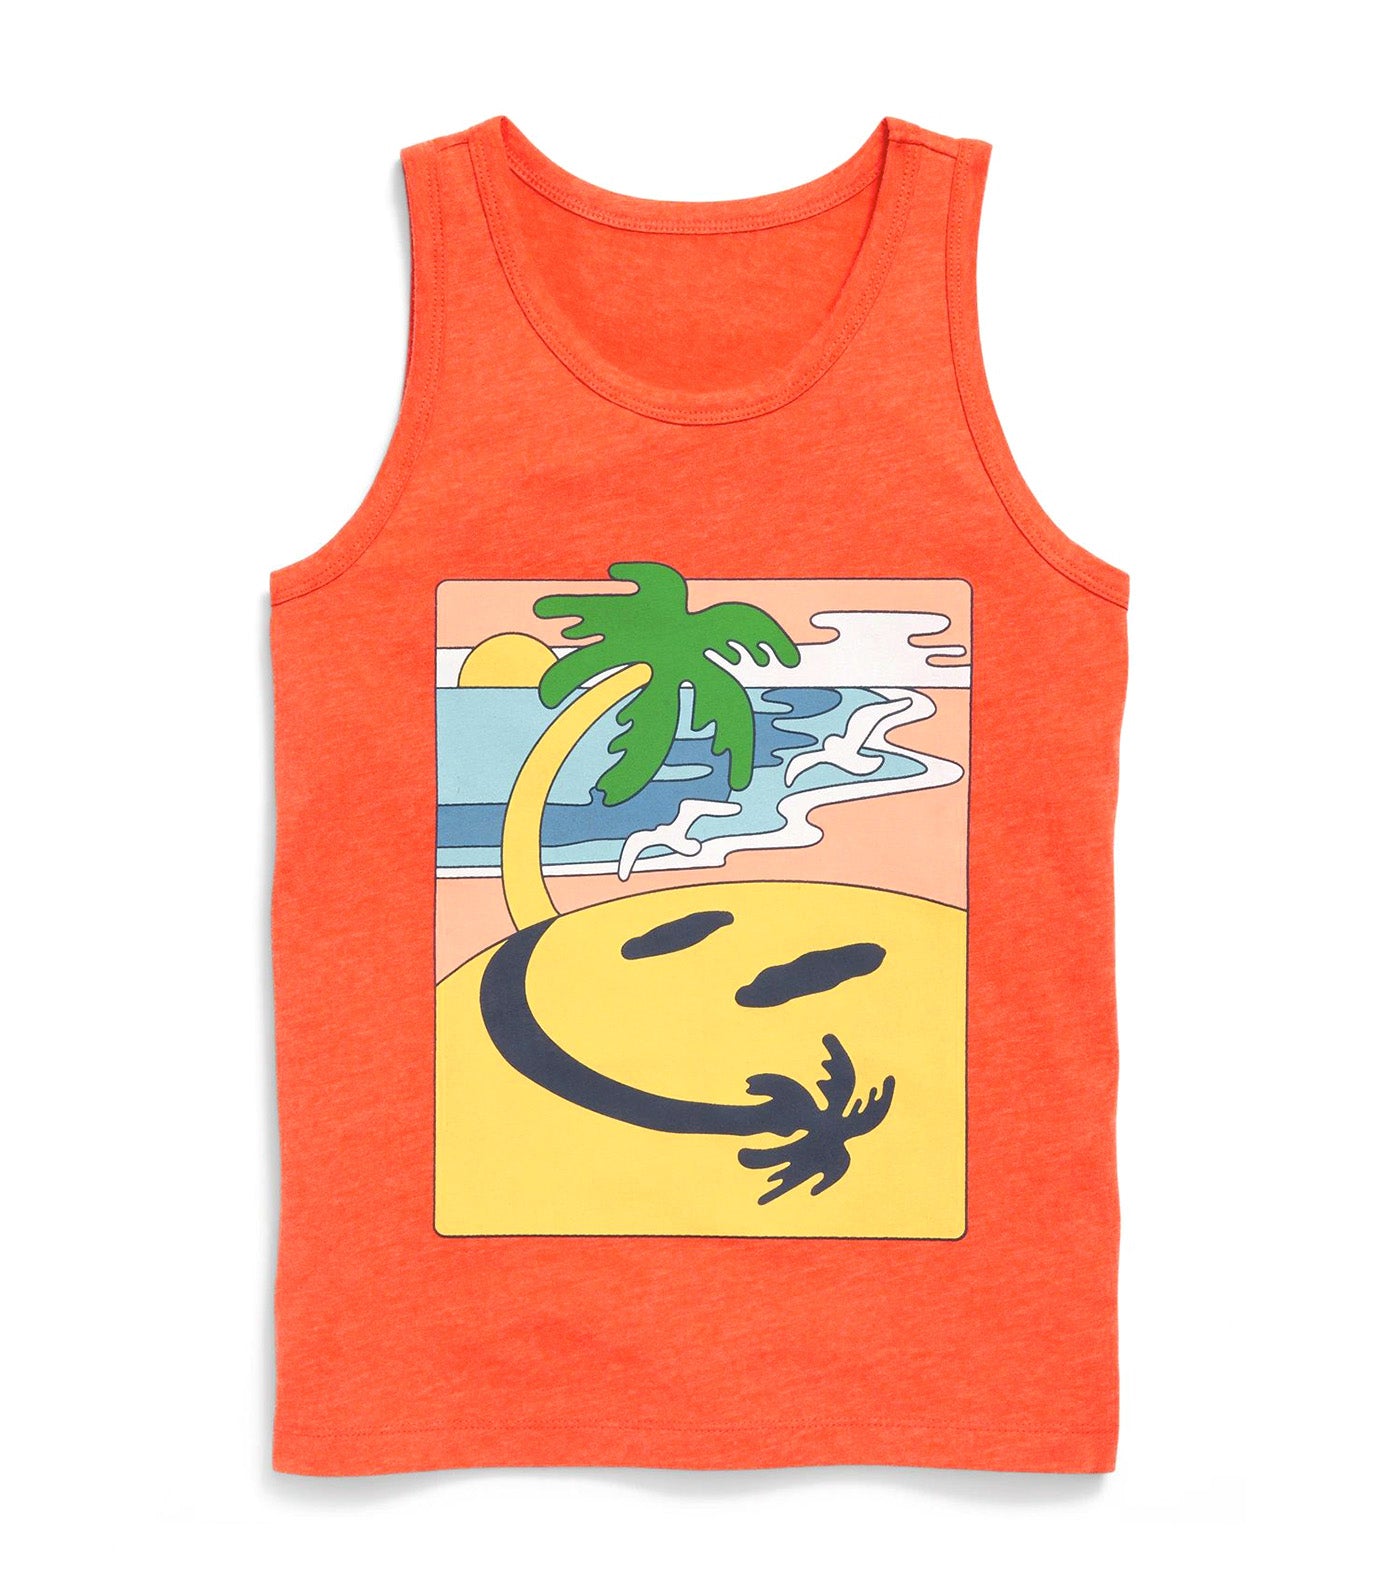 Softest Graphic Tank Top for Boys Warm Sunset